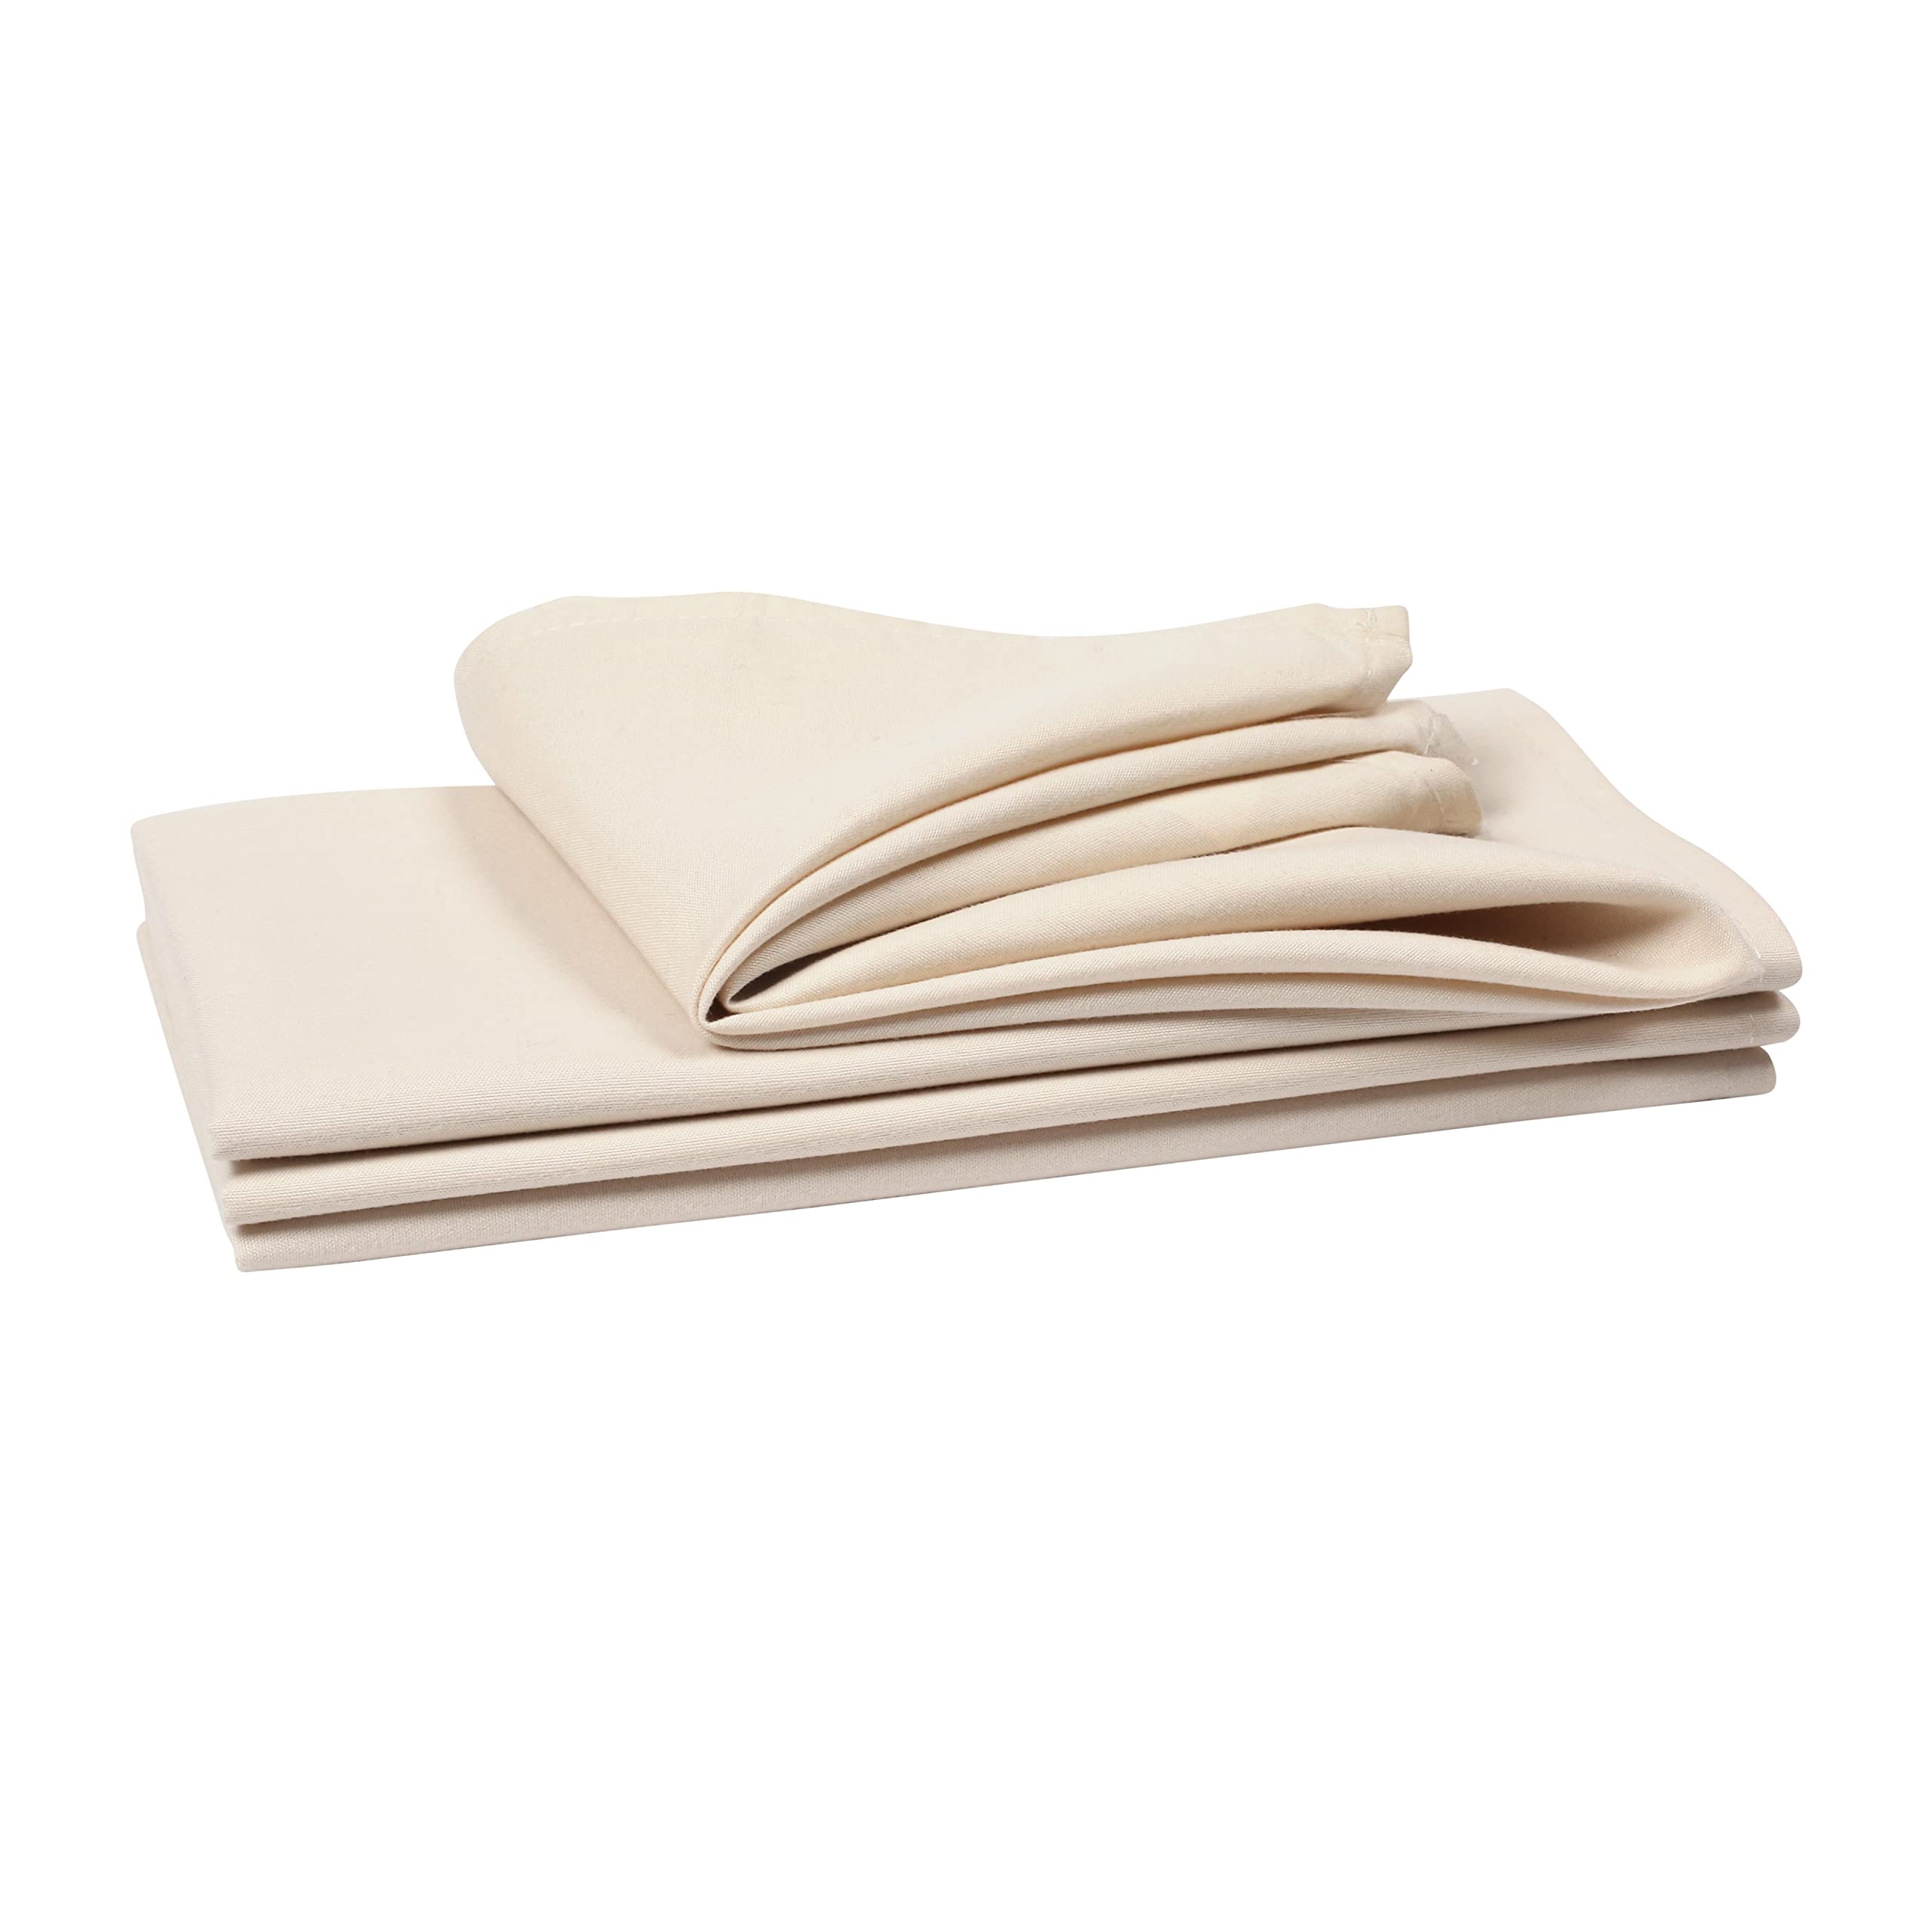 Cloth Dinner Napkins with Hemmed Edges 18x18 Inches Washable - 100% Polyester Soft & Comfortable Reusable Napkins for Weddings, Parties or Daily Use (Set of 12, Almond Beige)